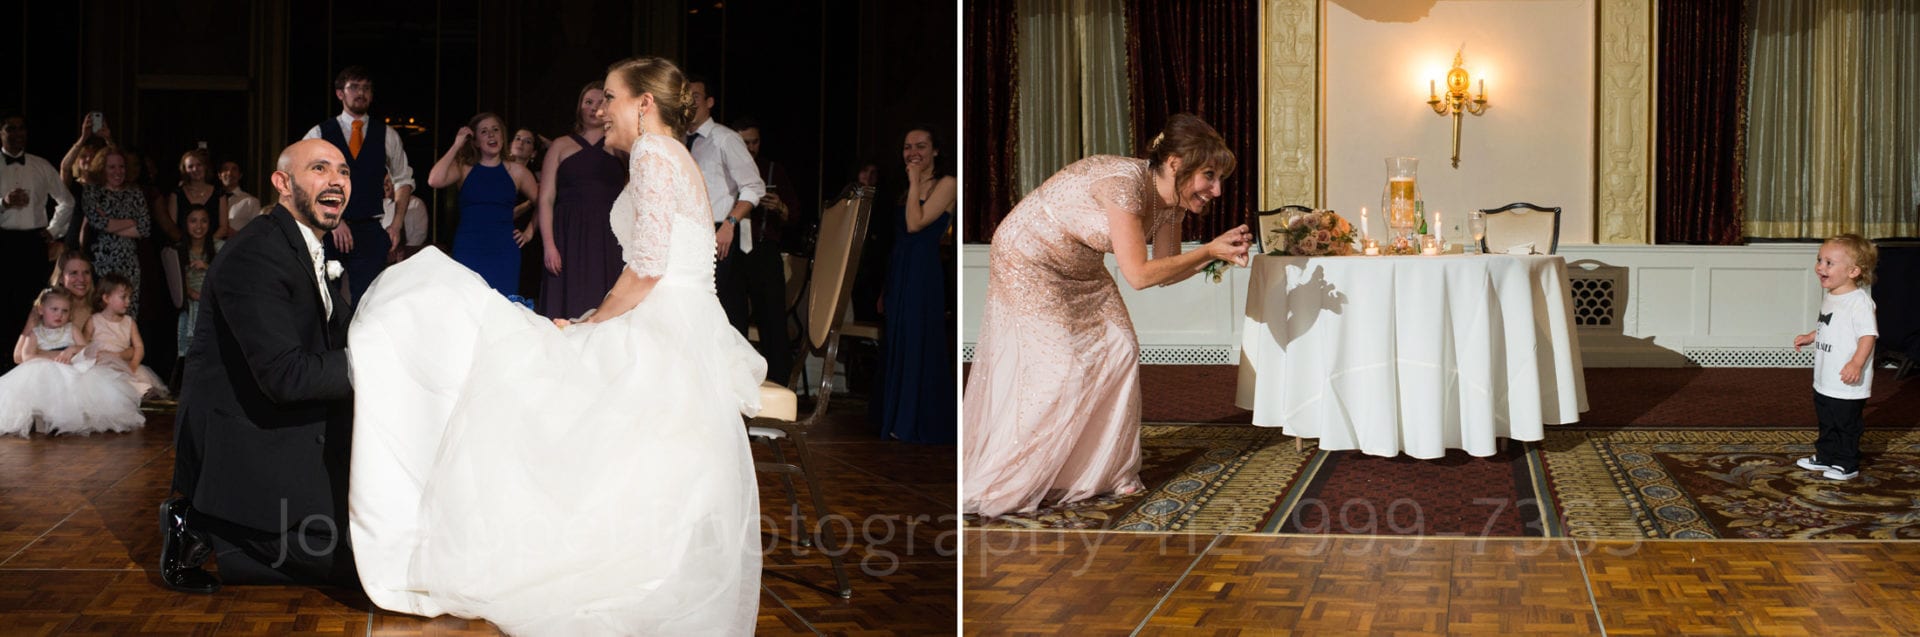 a groom puts a garter on his bride and a bridesmaid plays with a child